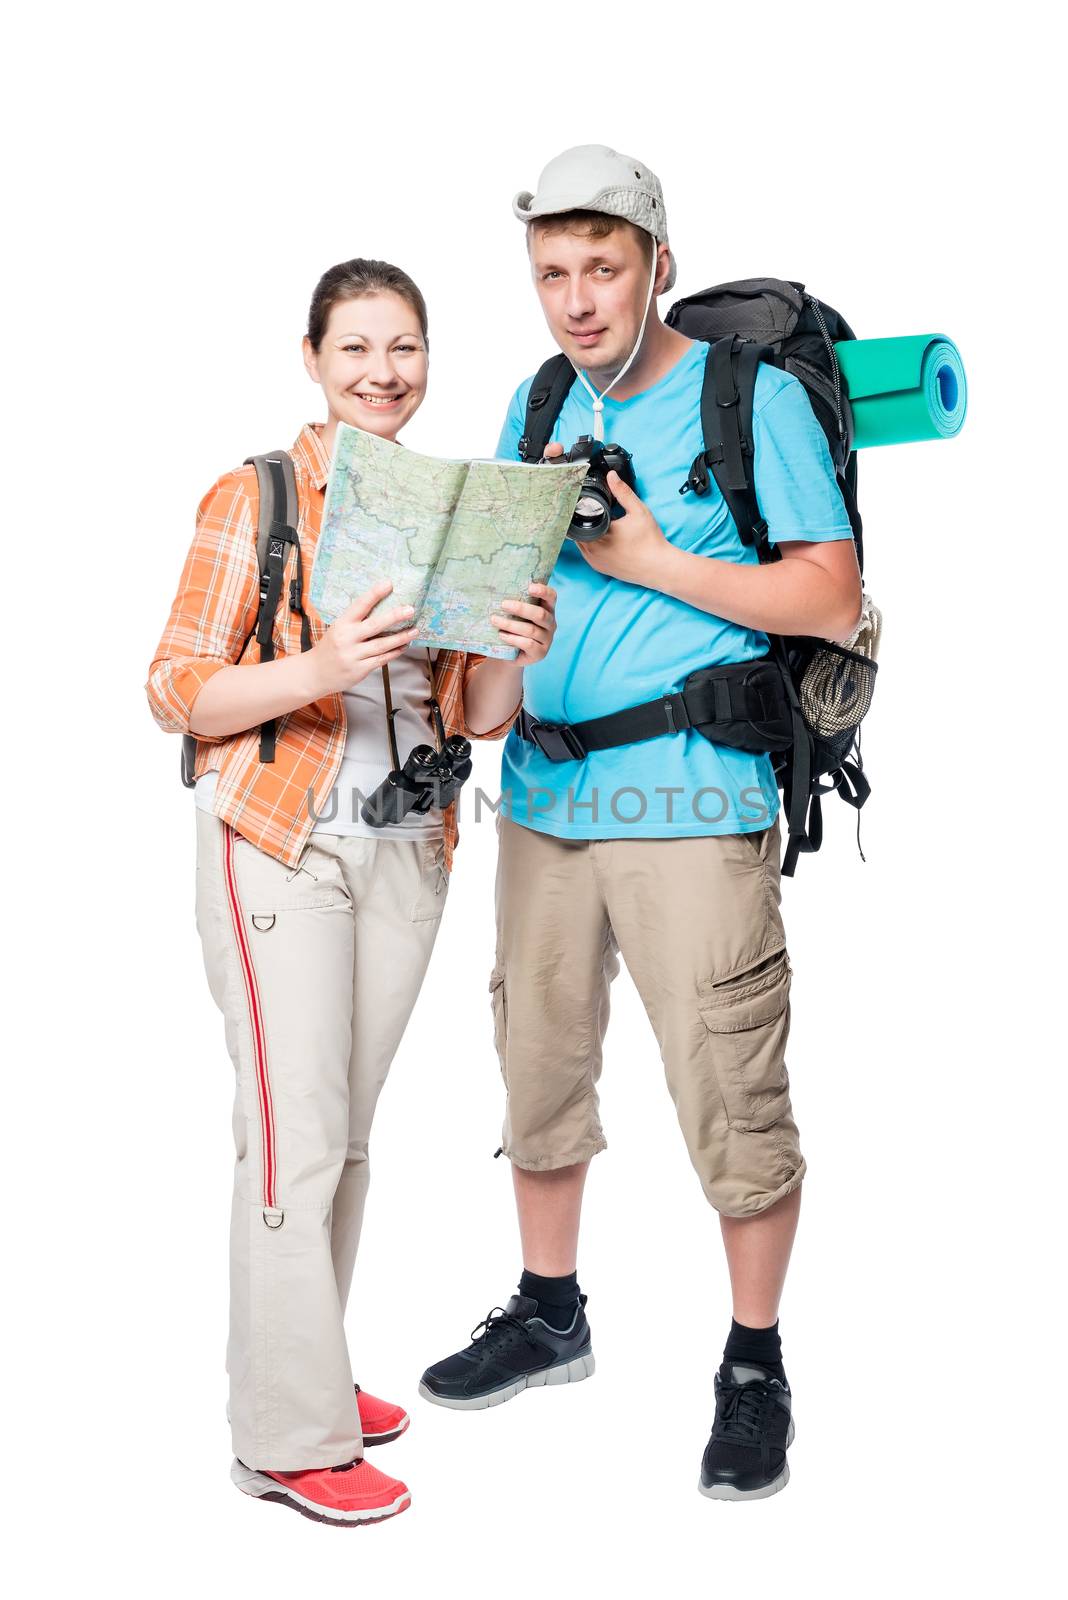 successful couple of travelers with backpacks on a white backgro by kosmsos111